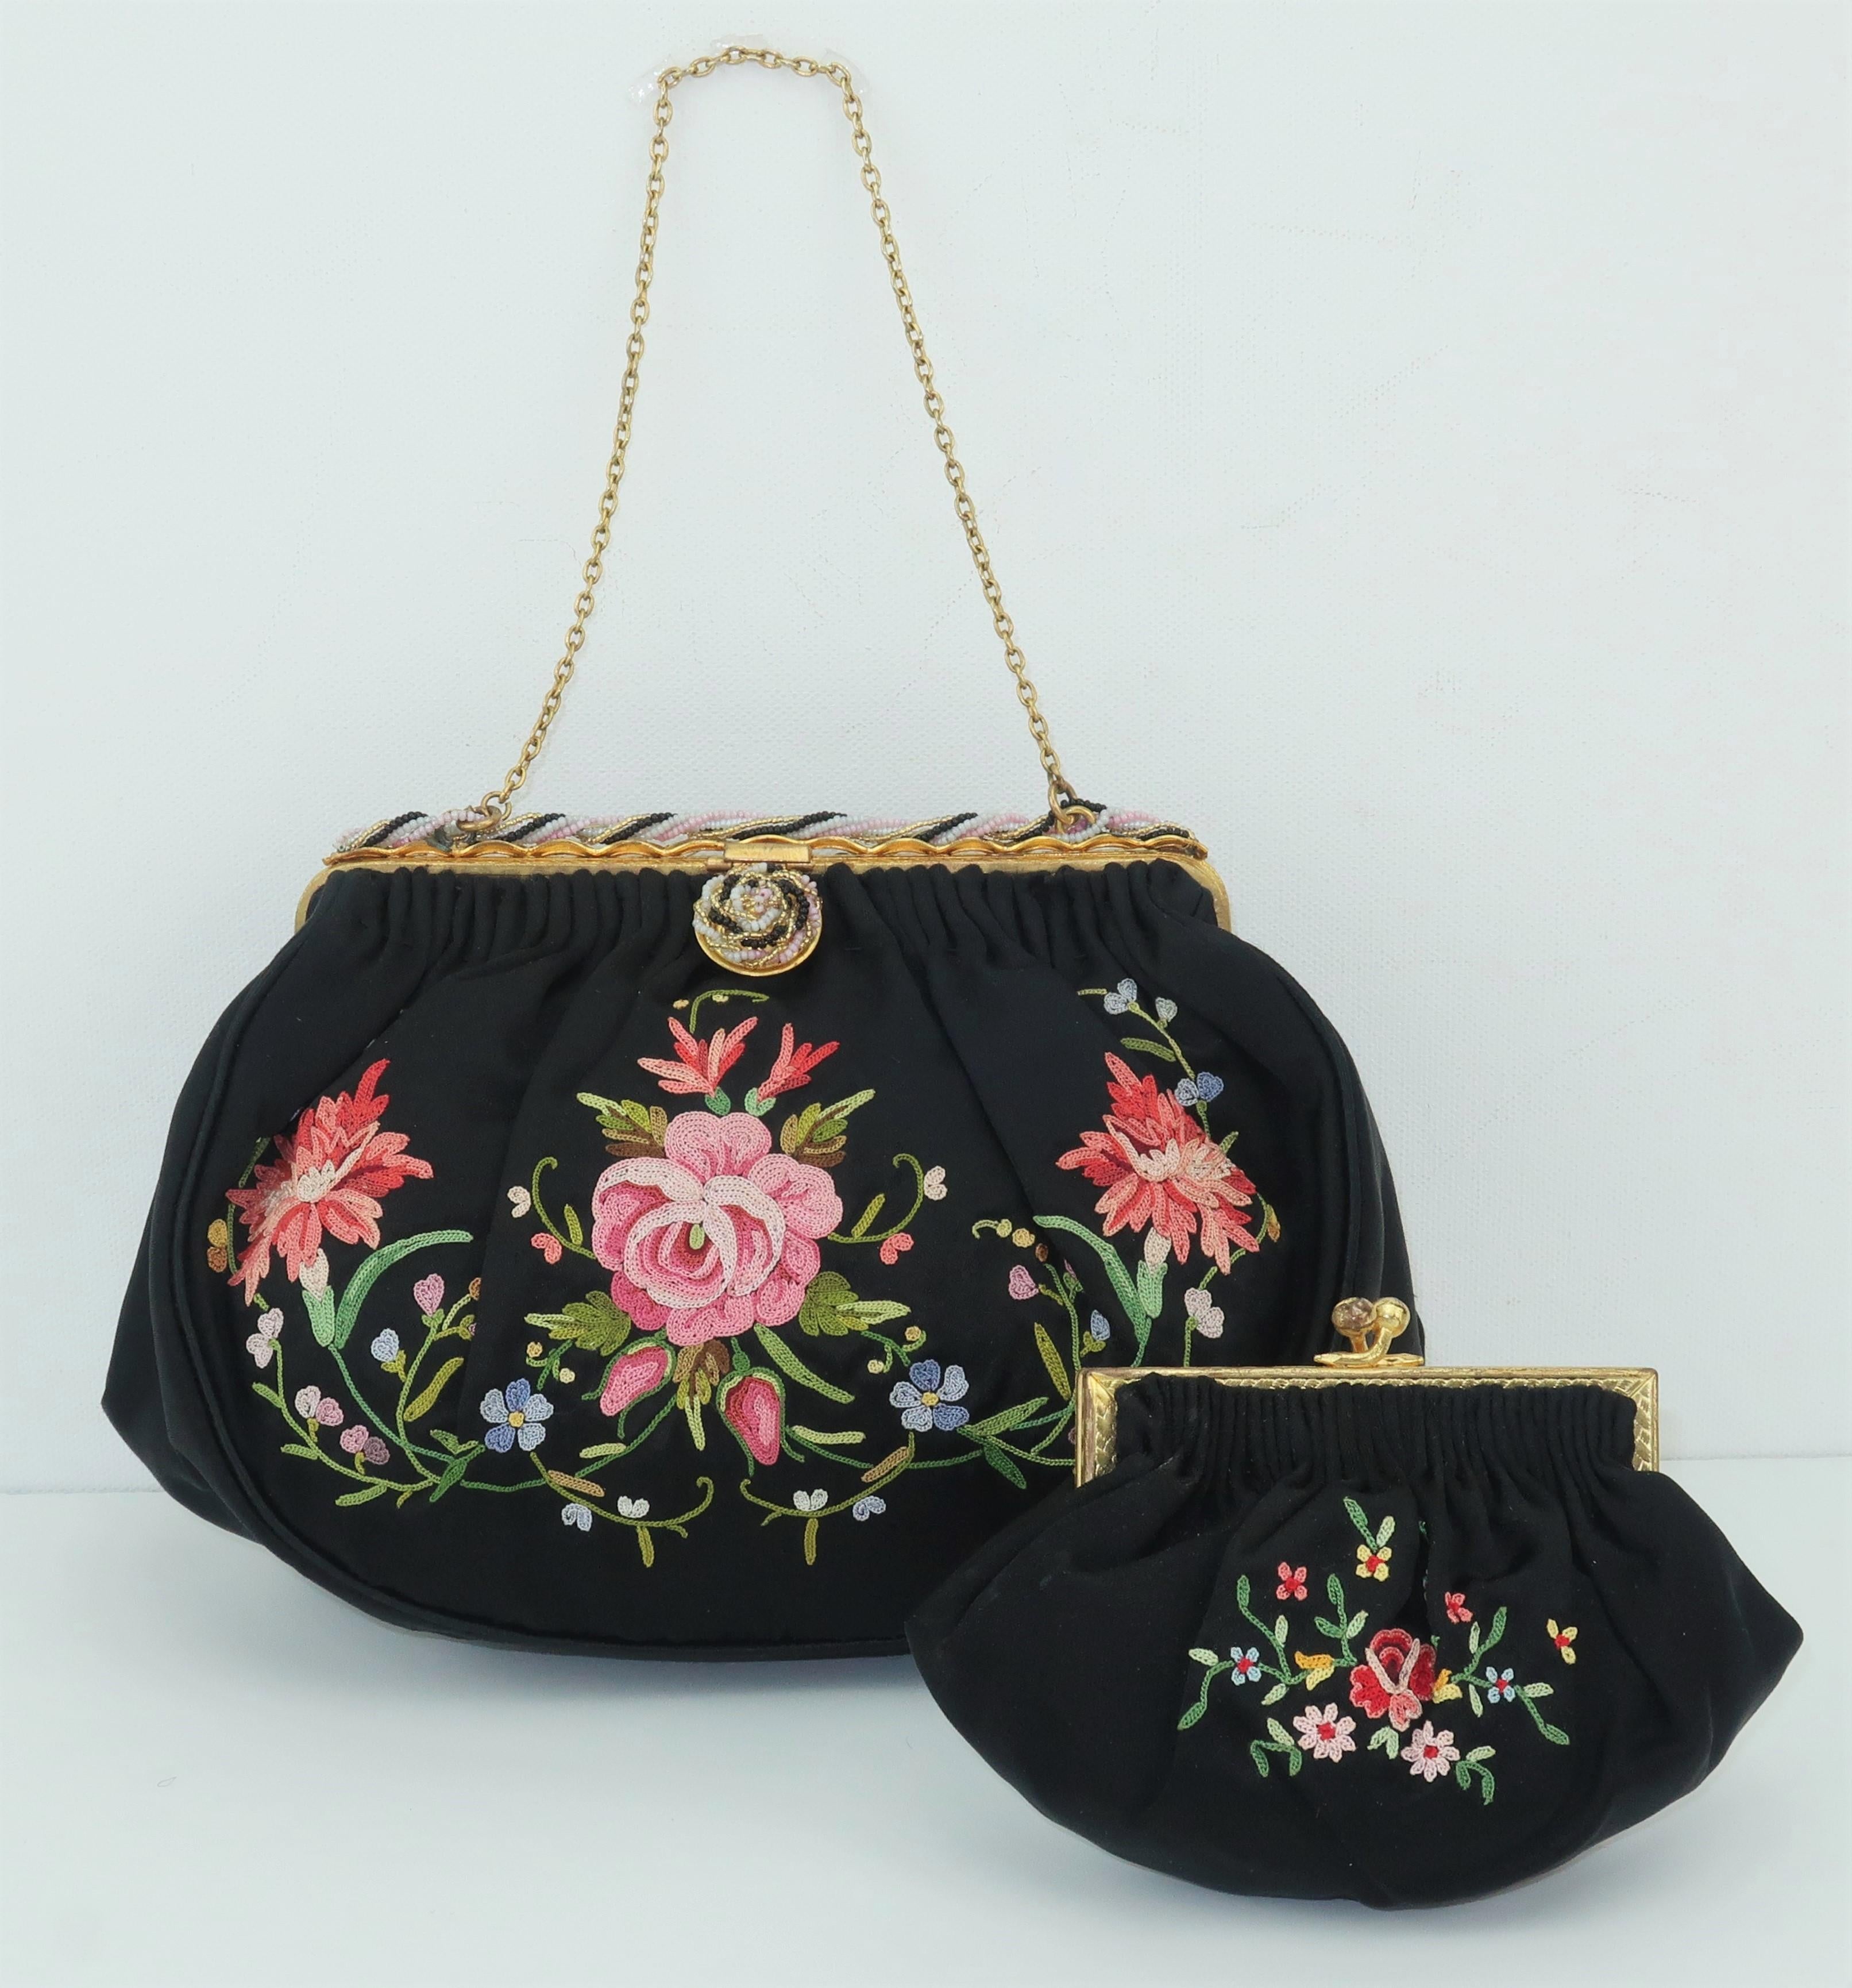 This delicate and ultra feminine C.1950 French black satin handbag features a bright floral chain stitch pattern in shades of pink, red, yellow, blue and green and a chain handle. The gilt metal frame is accented by a braided seed bead design with a